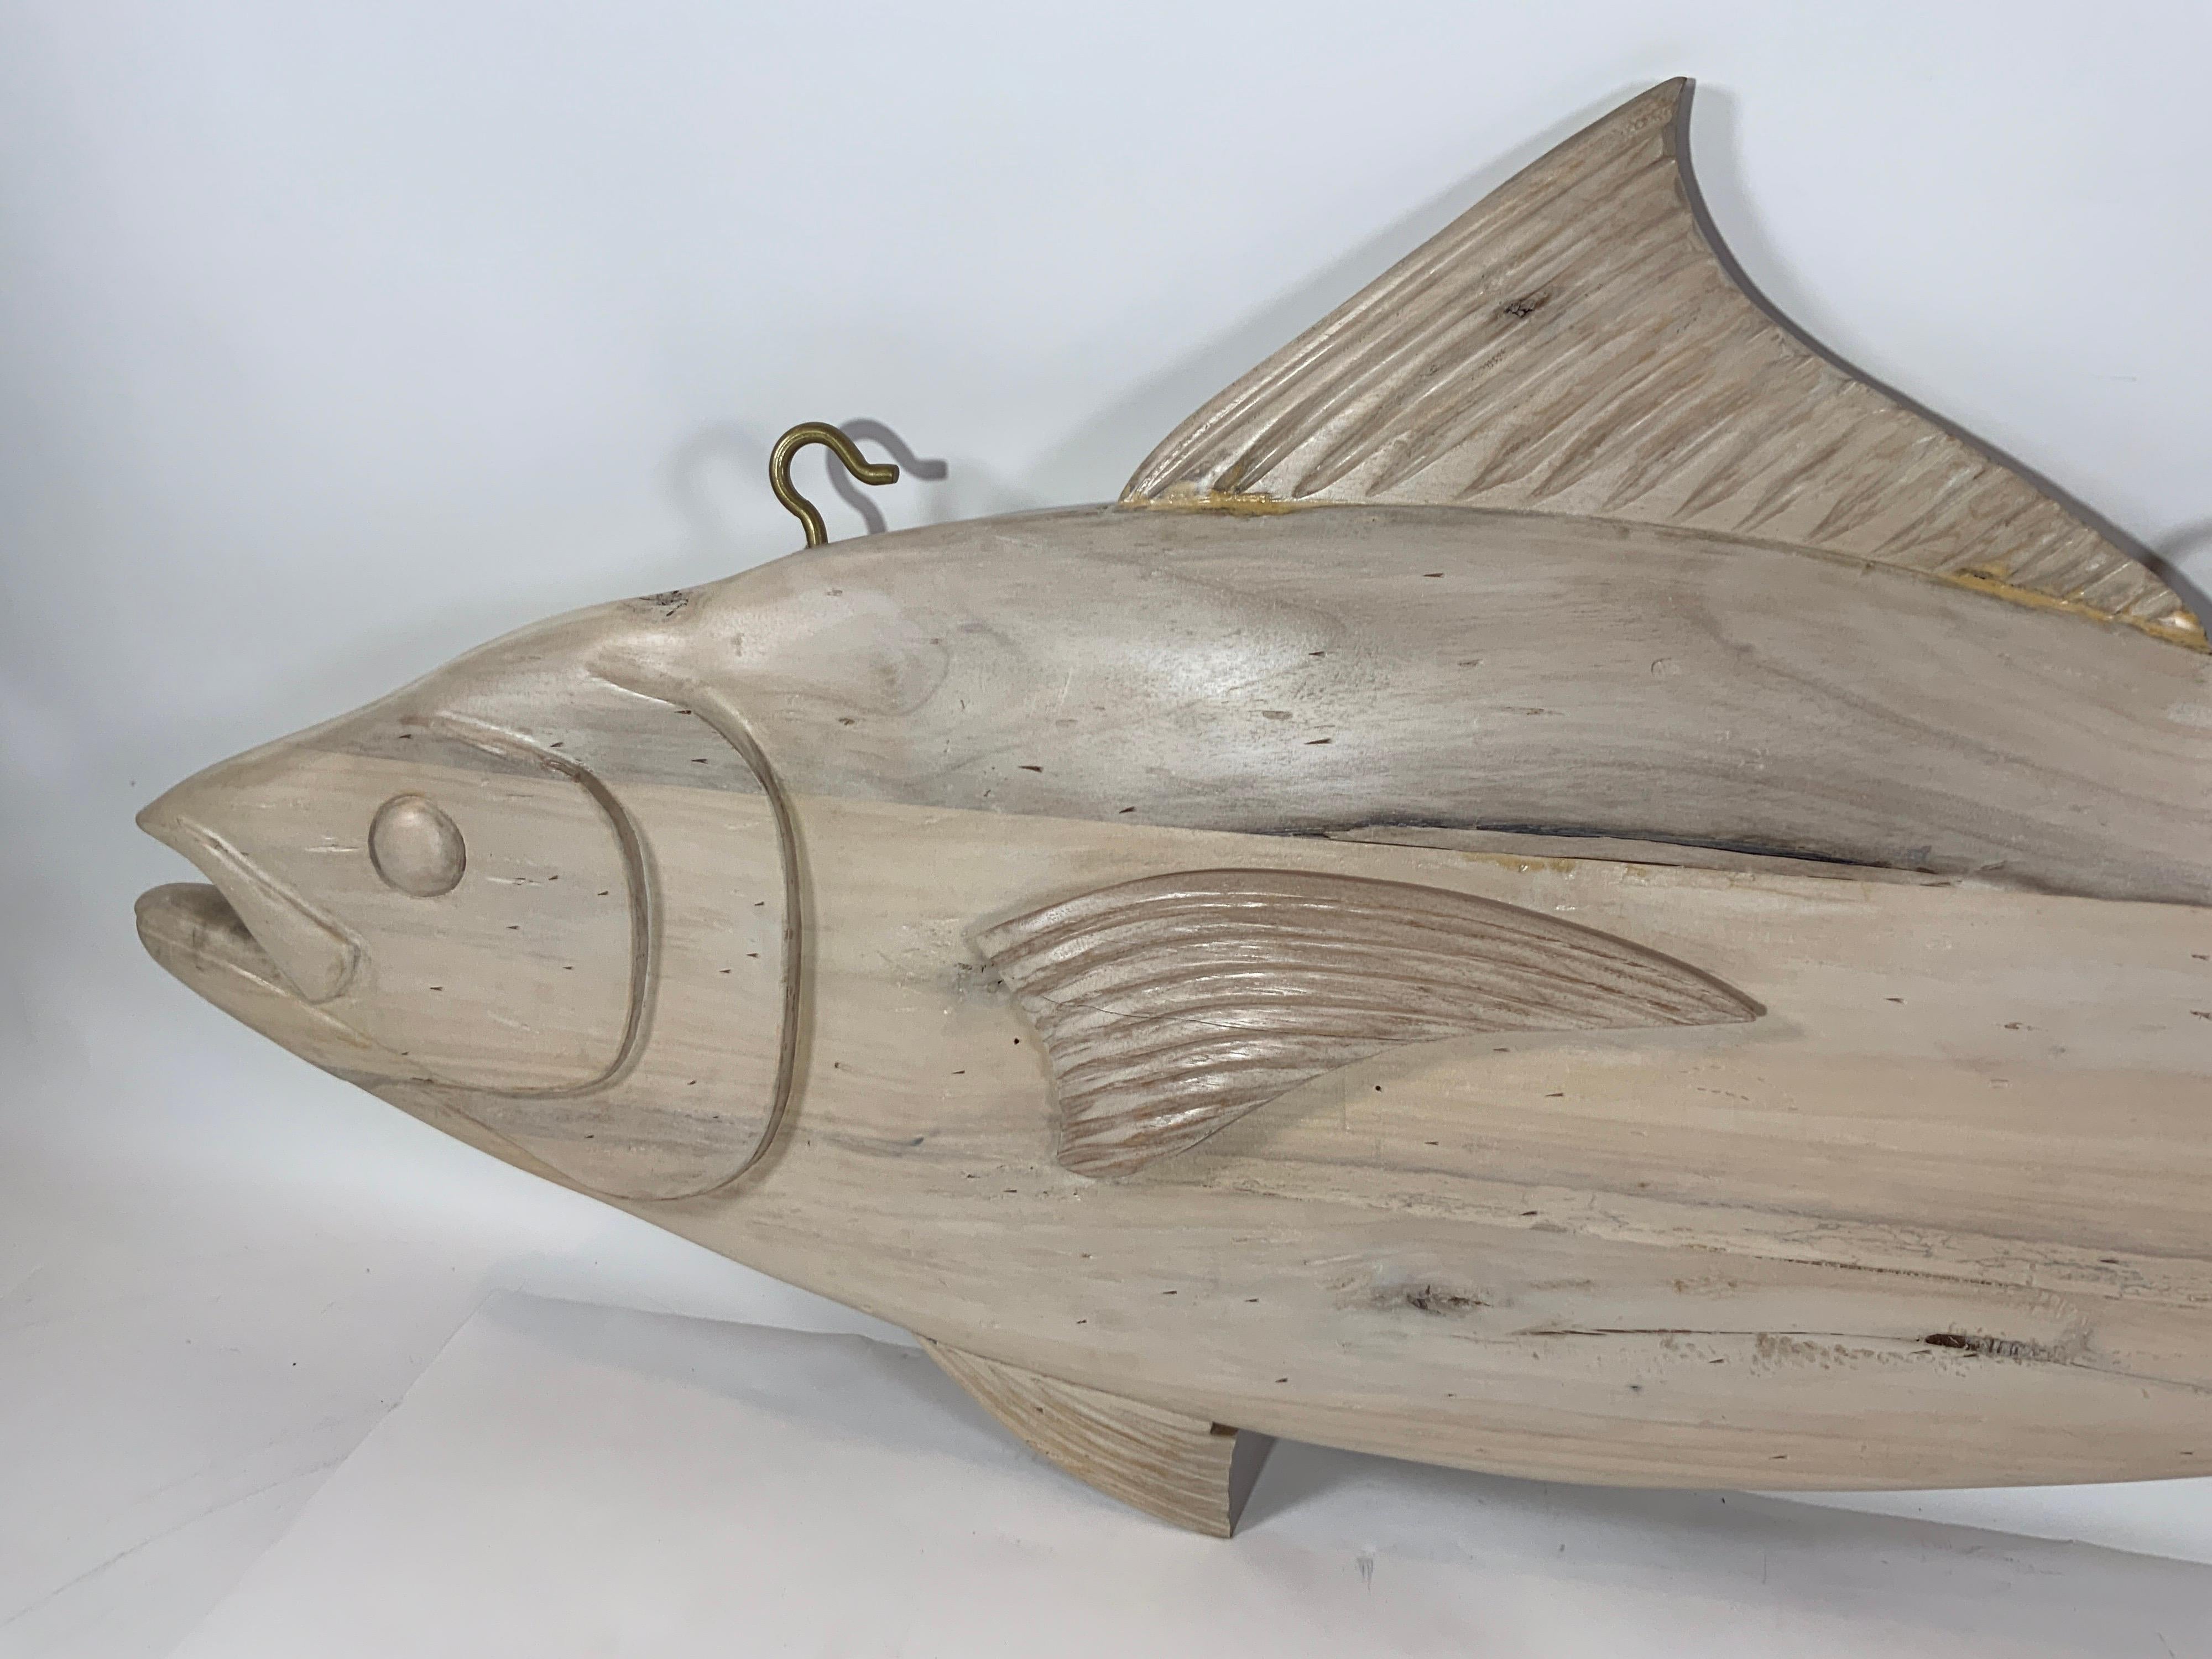 Six Foot Carved Wood Tuna Fish For Sale 3